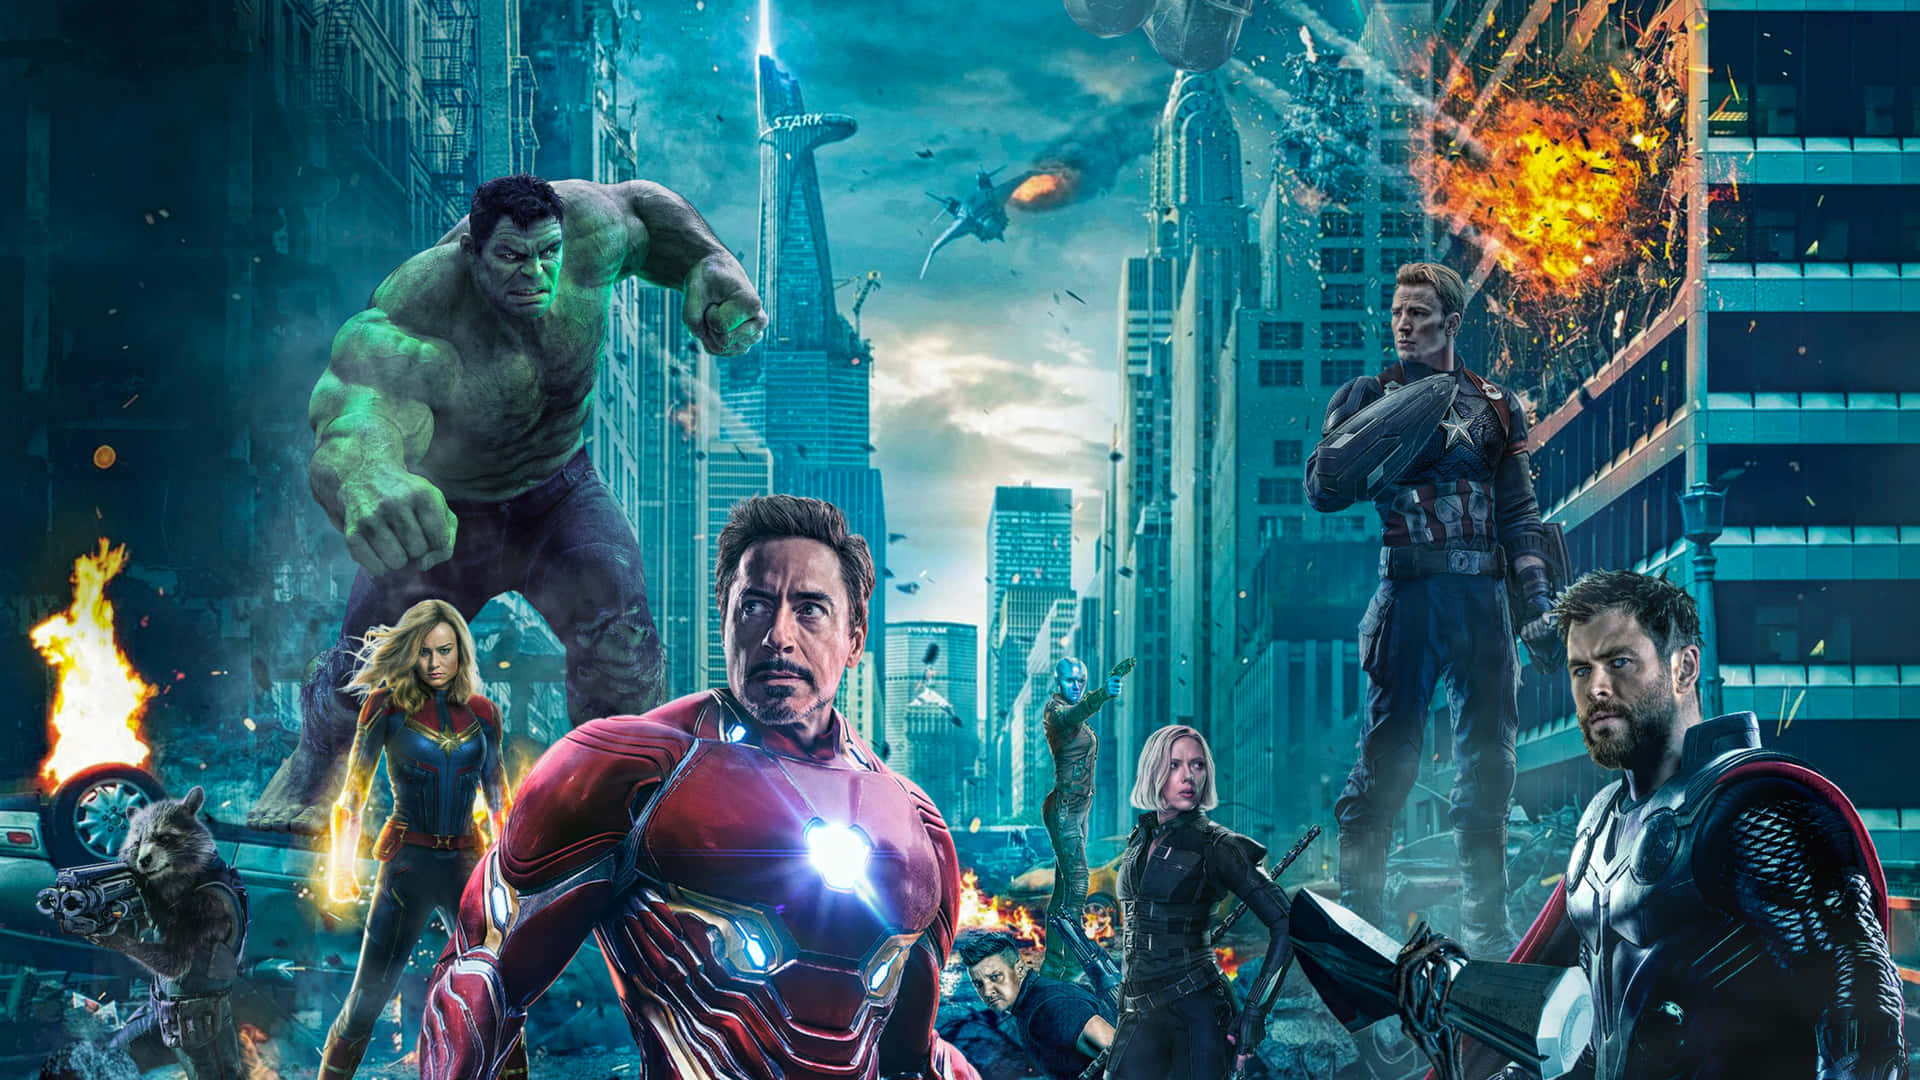 Join the Earth's mightiest heroes in the action-packed Marvel's Avengers movie Wallpaper